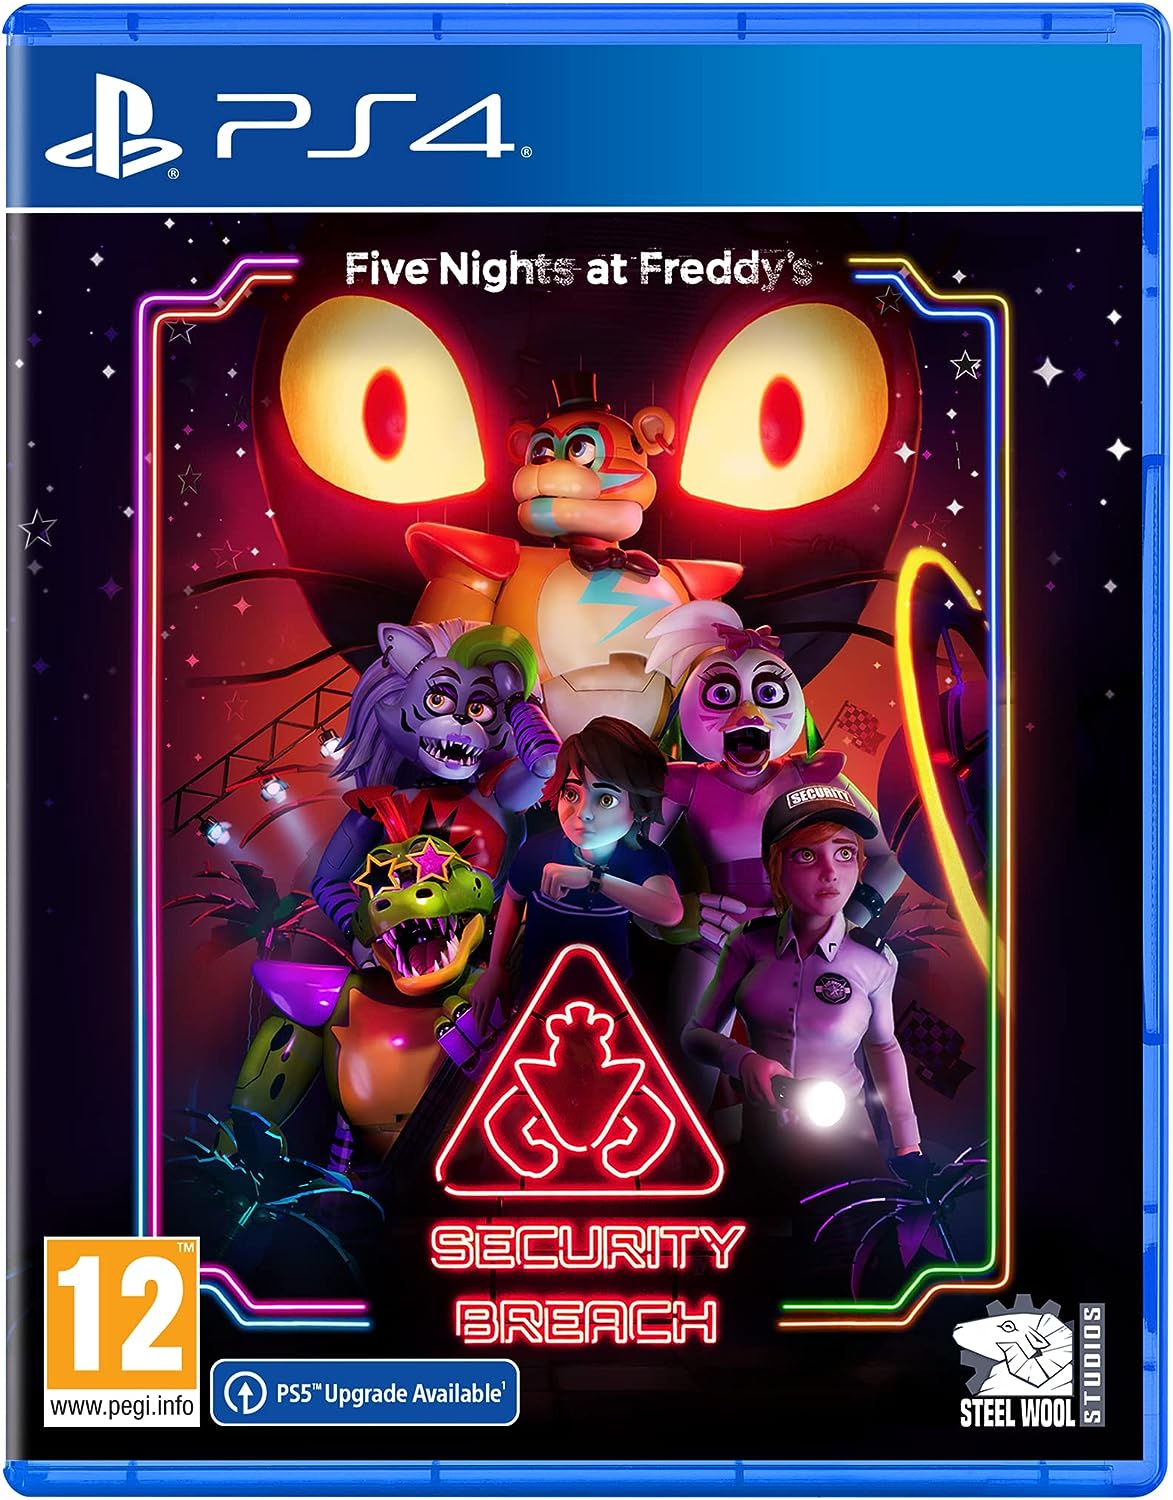 Five Nights at Freddy's: Security Breach Collector's Edition